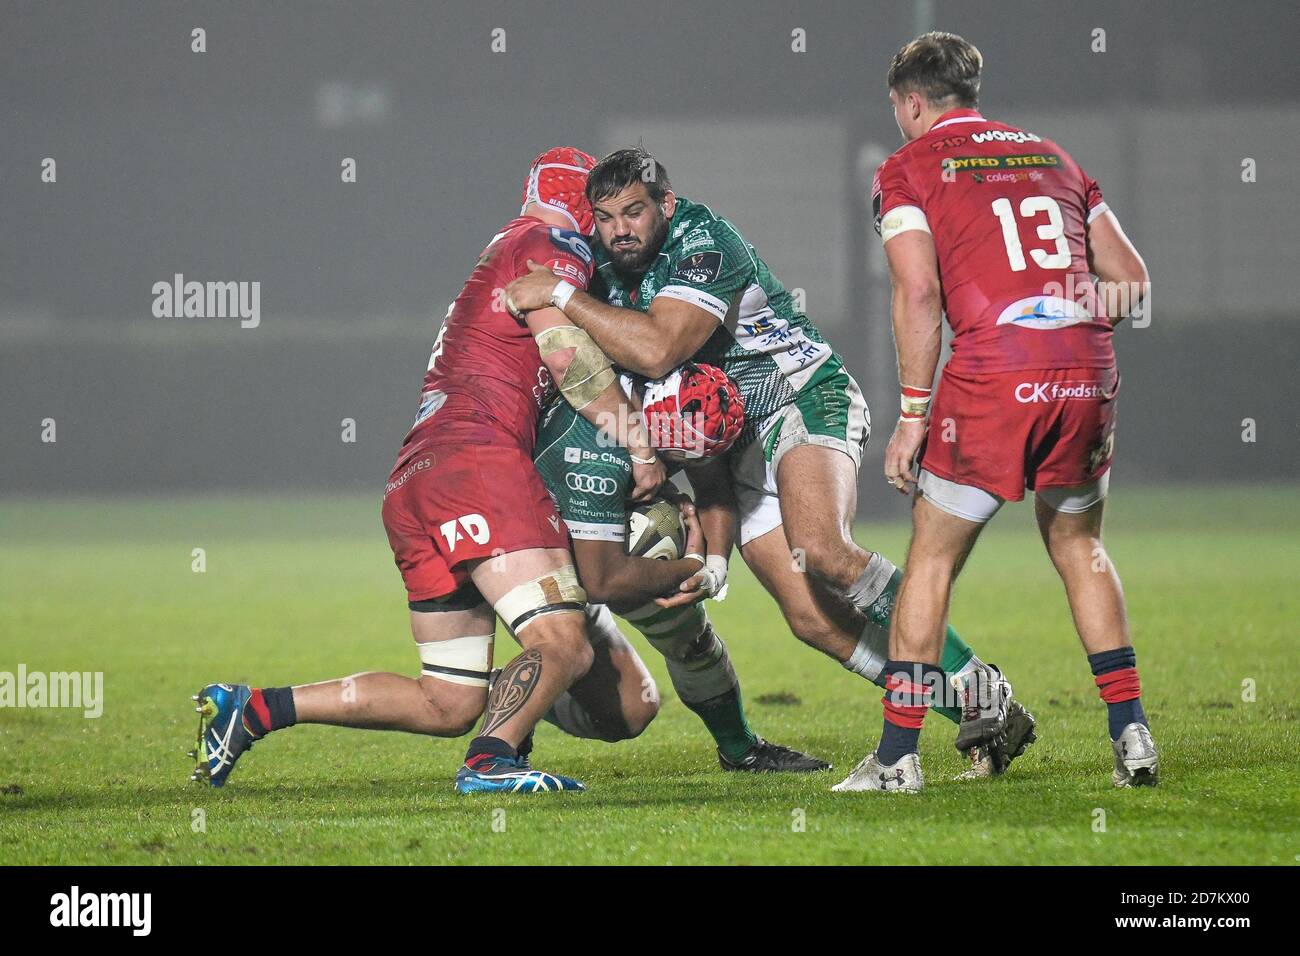 Stadio Comunale di Monigo, Treviso, Italy, 23 Oct 2020, Hame Faiva (Treviso) tackled by Blade Thomson (Scarlets) helped by Nicola Quaglio (Treviso) during Benetton Treviso vs Scarlets Rugby, Rugby Guinness Pro 14 match - Credit: LM/Ettore Griffoni/Alamy Live News Stock Photo